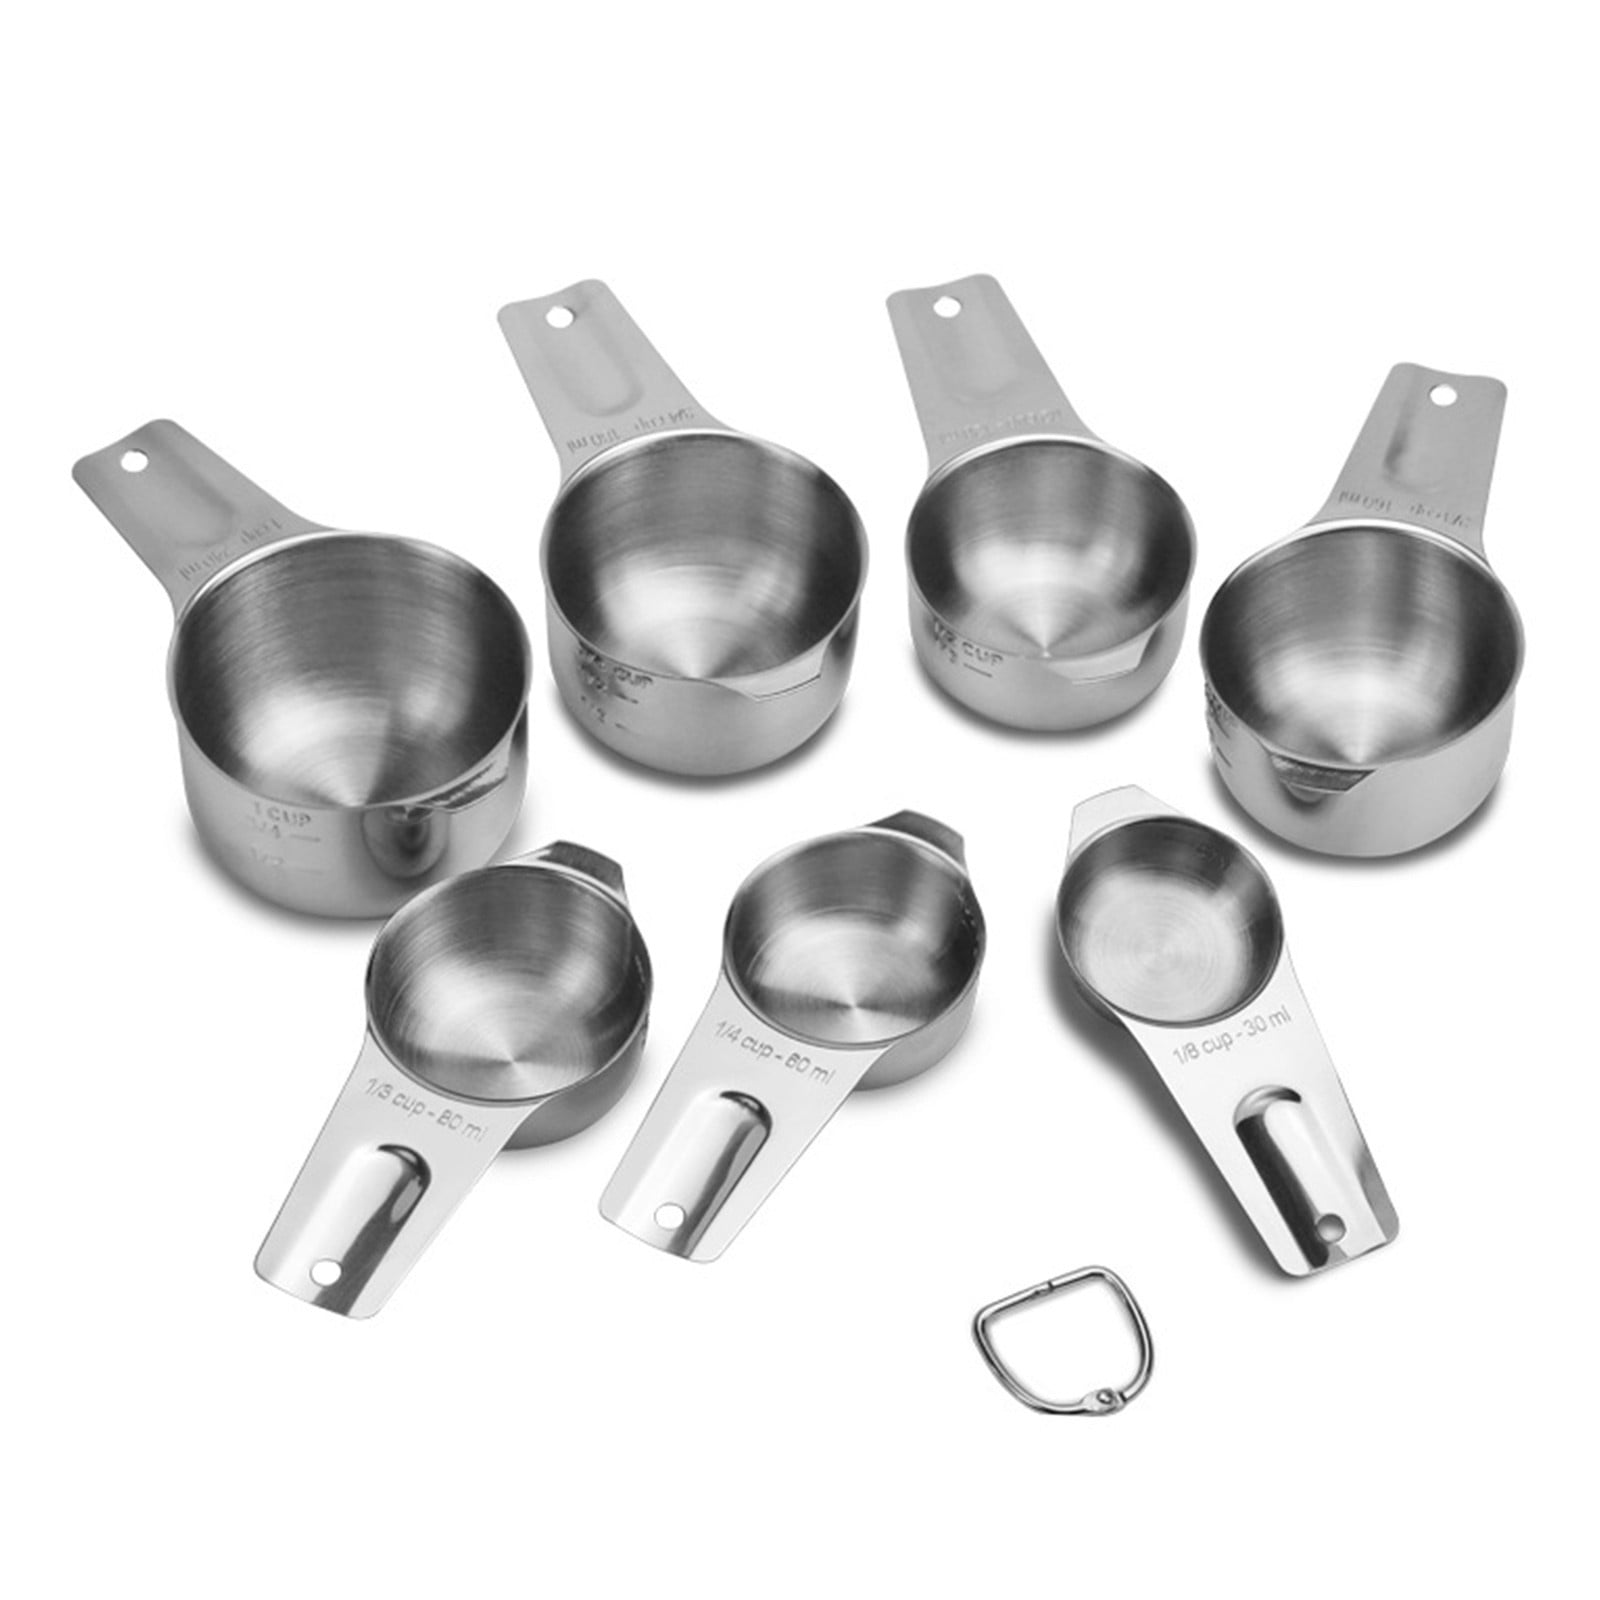 NEW Measuring Cups and Measuring Spoons Set of 8pcs Stainless Steel Handle  ，N